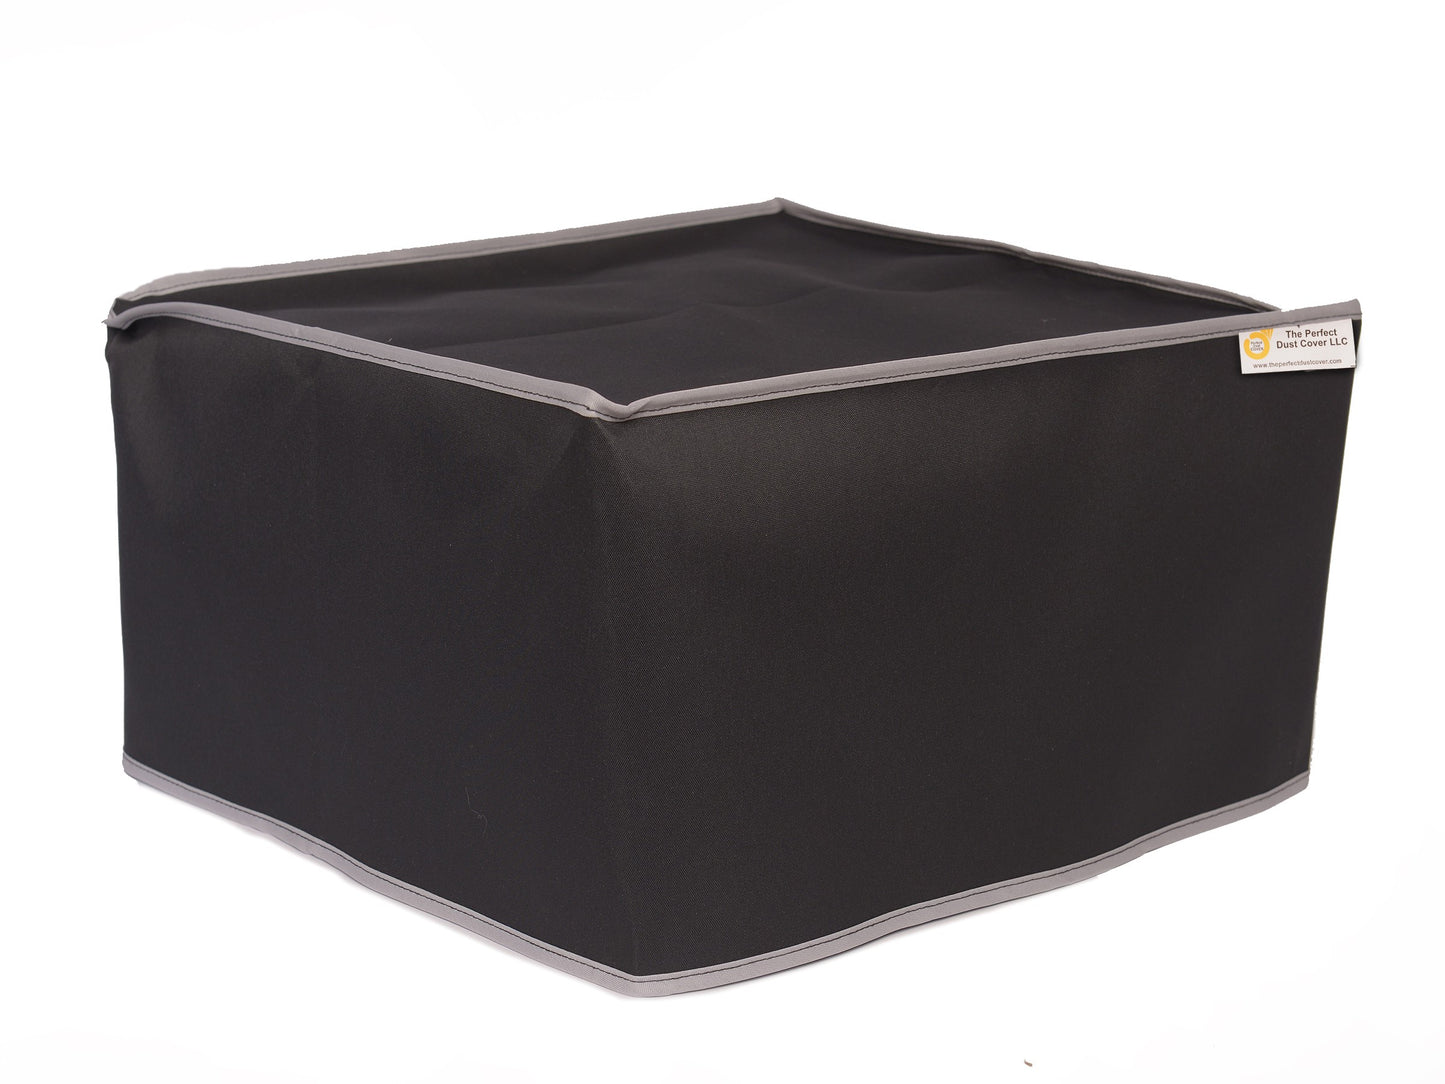 The Perfect Dust Cover, Black Nylon Cover Compatible with Brother MFC-L8900CDW Color Laser Printer with Lower Paper Tray (250 sheet capacity), Anti Static and Waterproof Dust Cover Dimensions 19.5''W x 20.7''D x 25.6''H by Perfect Dust Cover